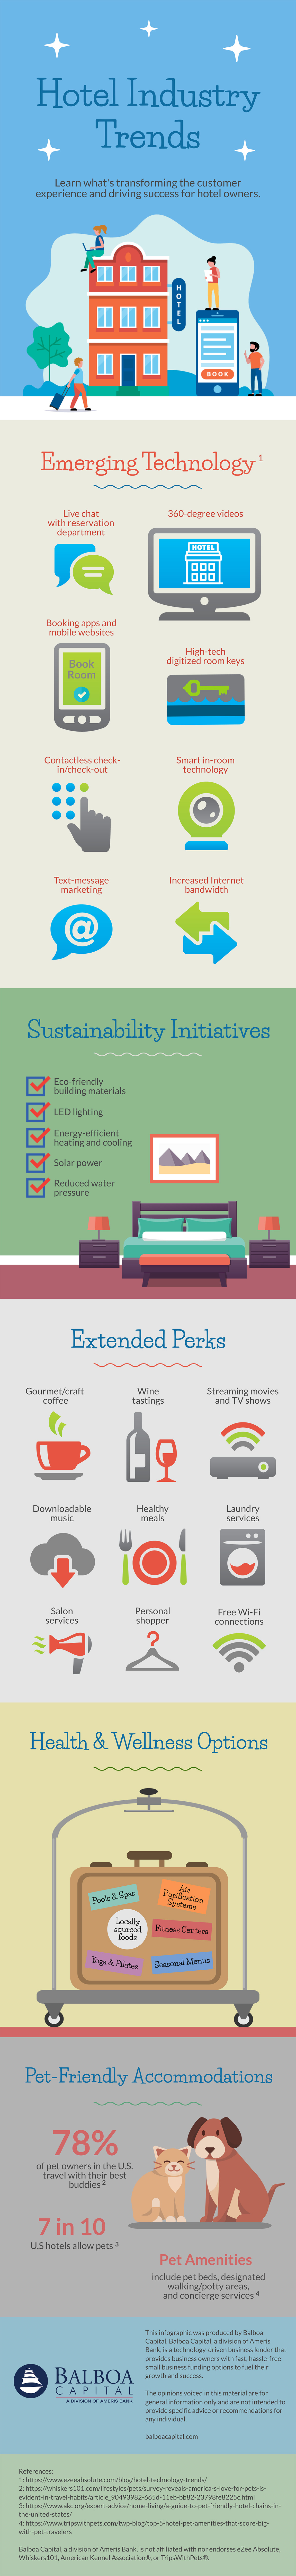 Hotel Industry Trends Infographic